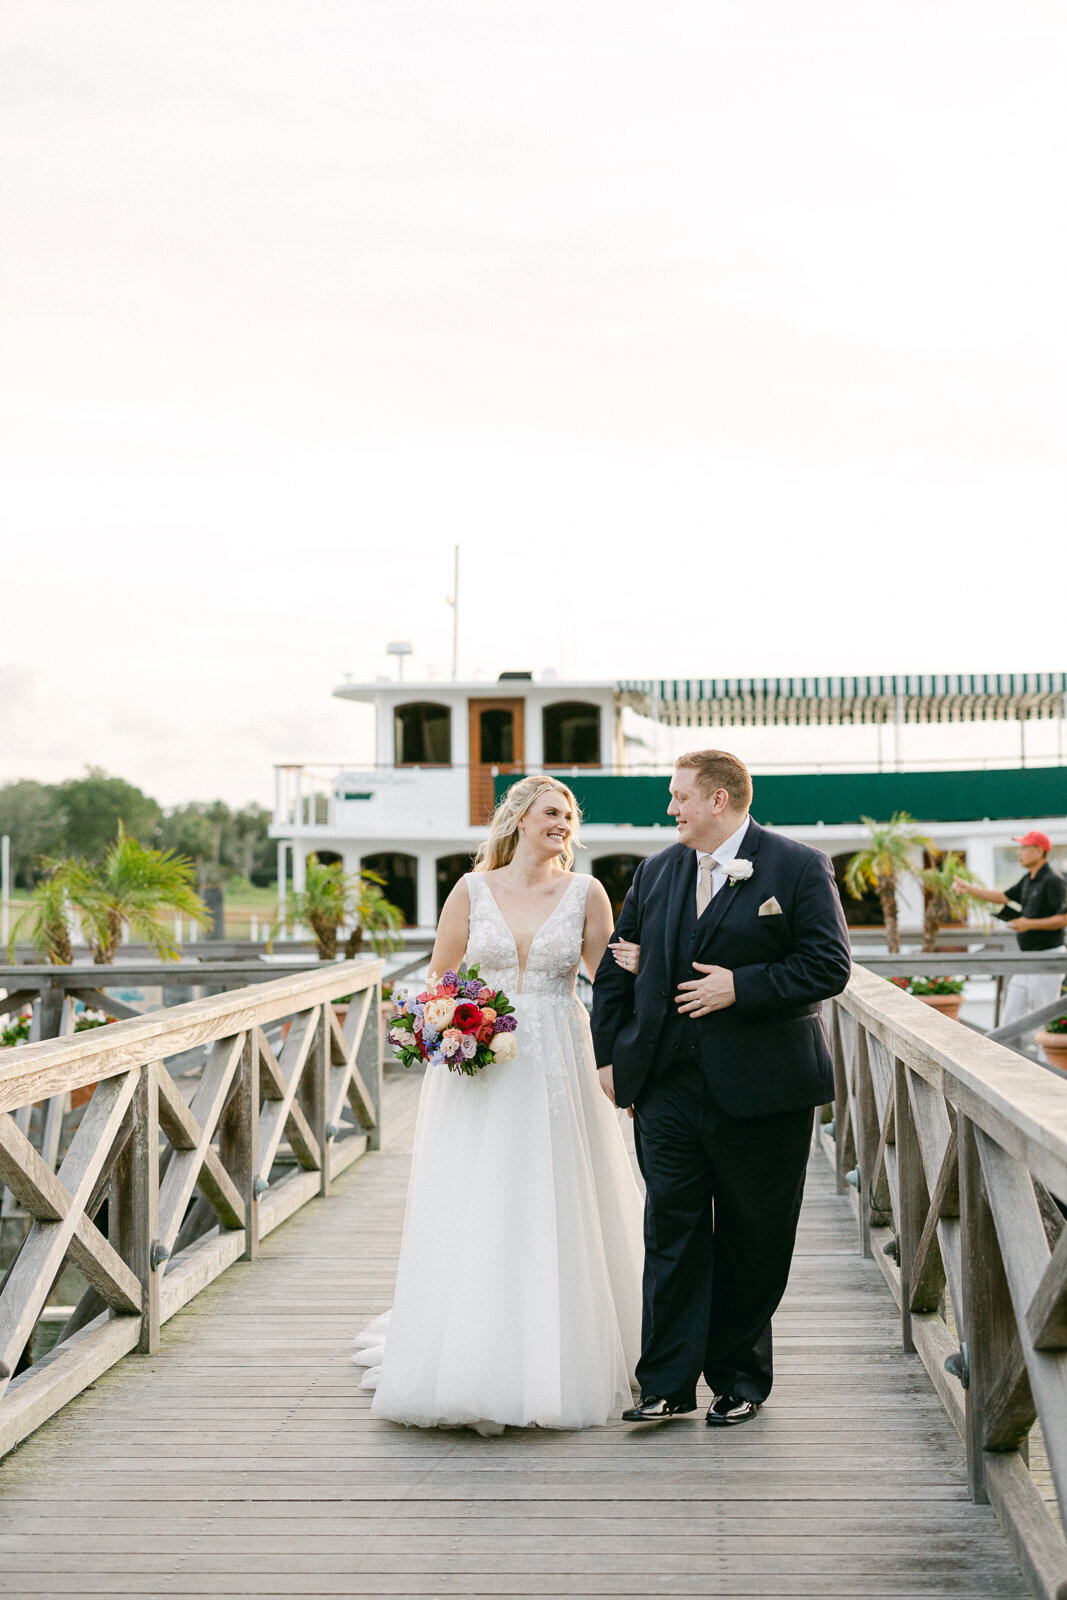 sea island wedding photography - intimate elopement - Darian Reilly Photography-72